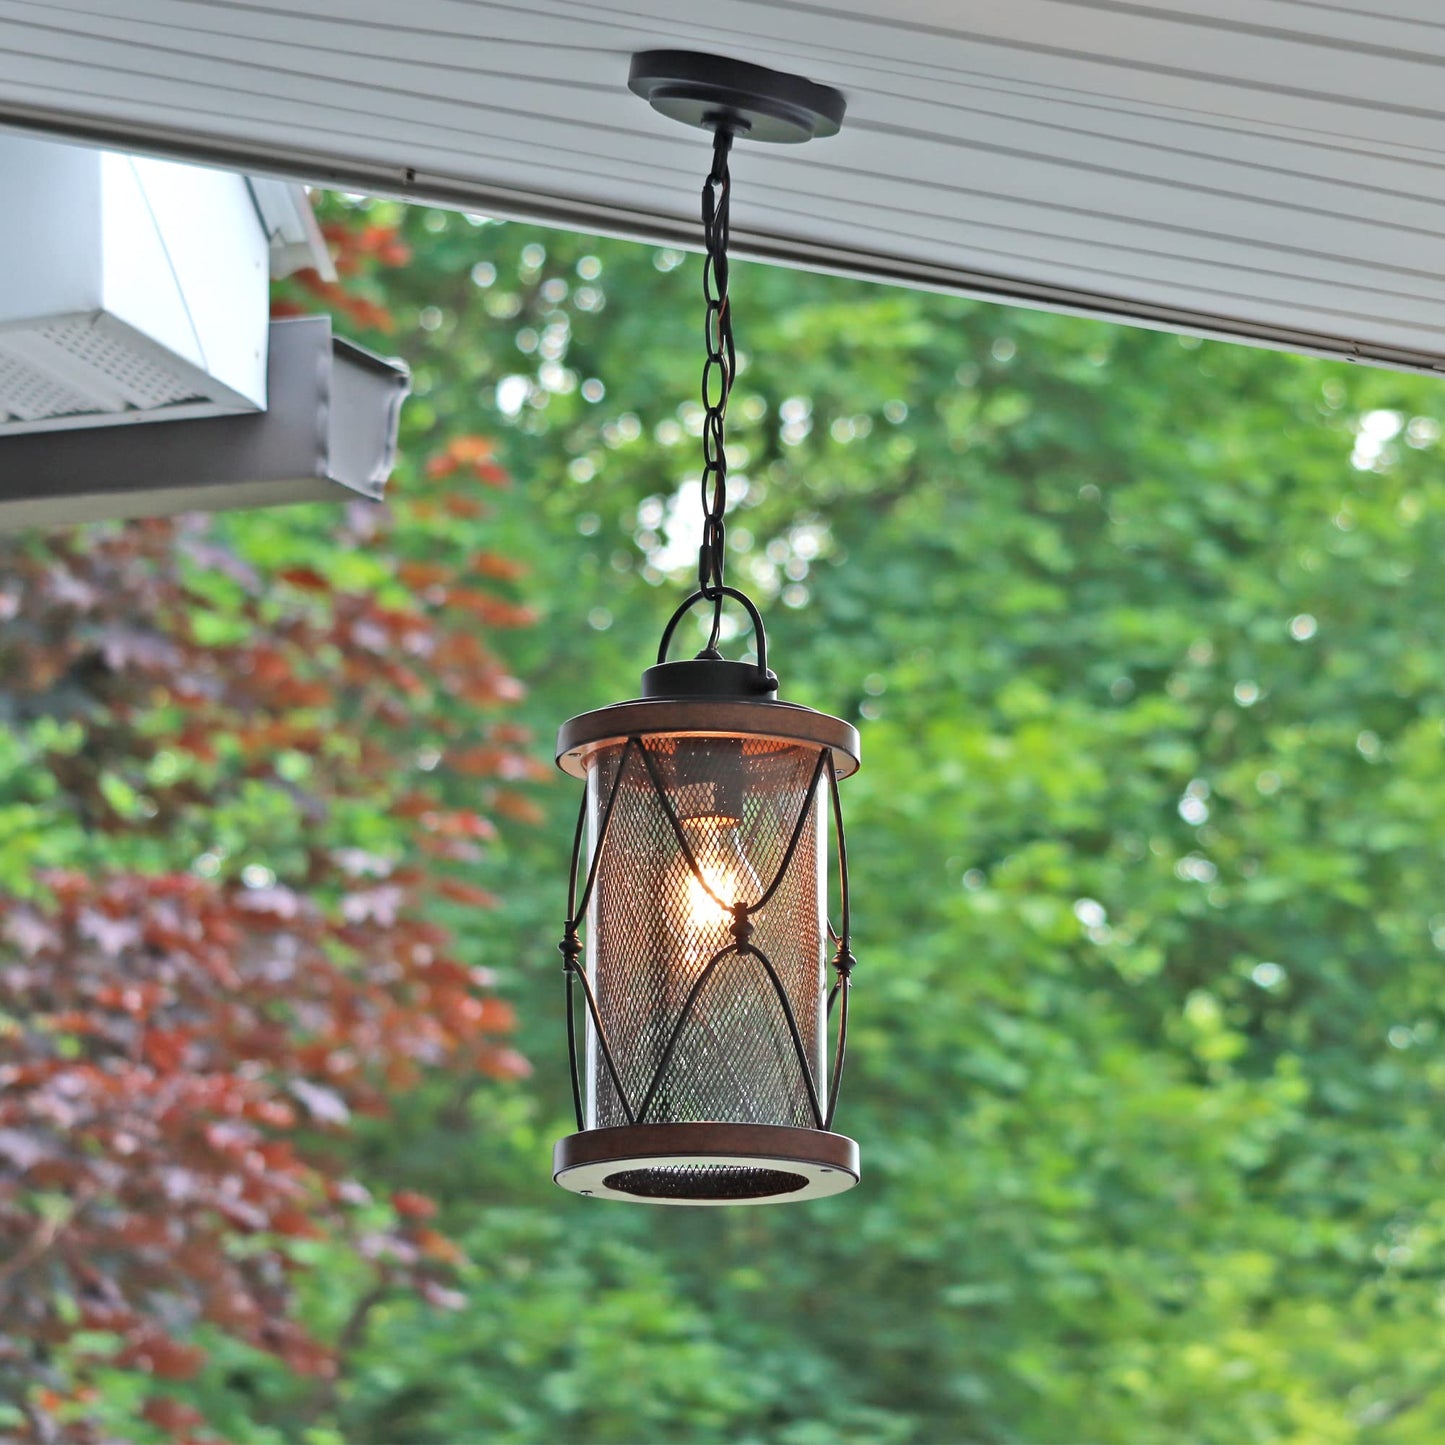 Inlight Outdoor Pendant Light for Porch, 1-Light Farmhouse Rustic Exterior Hanging Lantern, Matte Black and Barnwood Finish, Bulb Not Included, IN-0625-1-BK